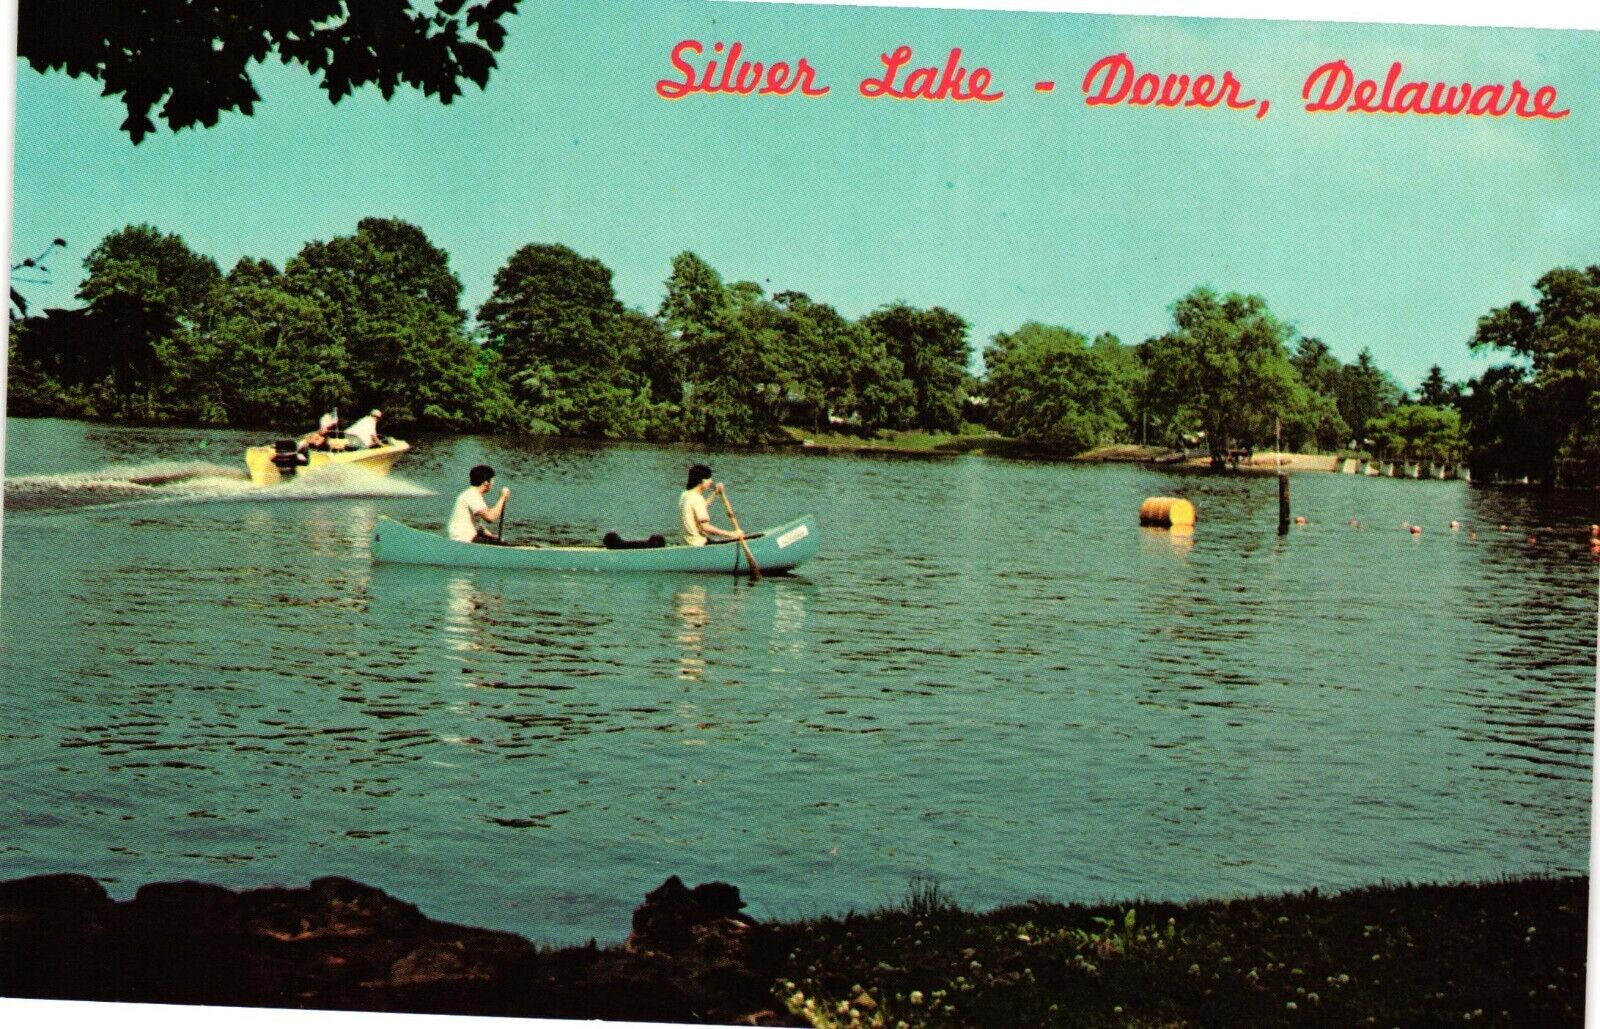 Canoeing At Silver Lake Dover Delaware Postcard Unposted C1960 1 Mile Long Lake